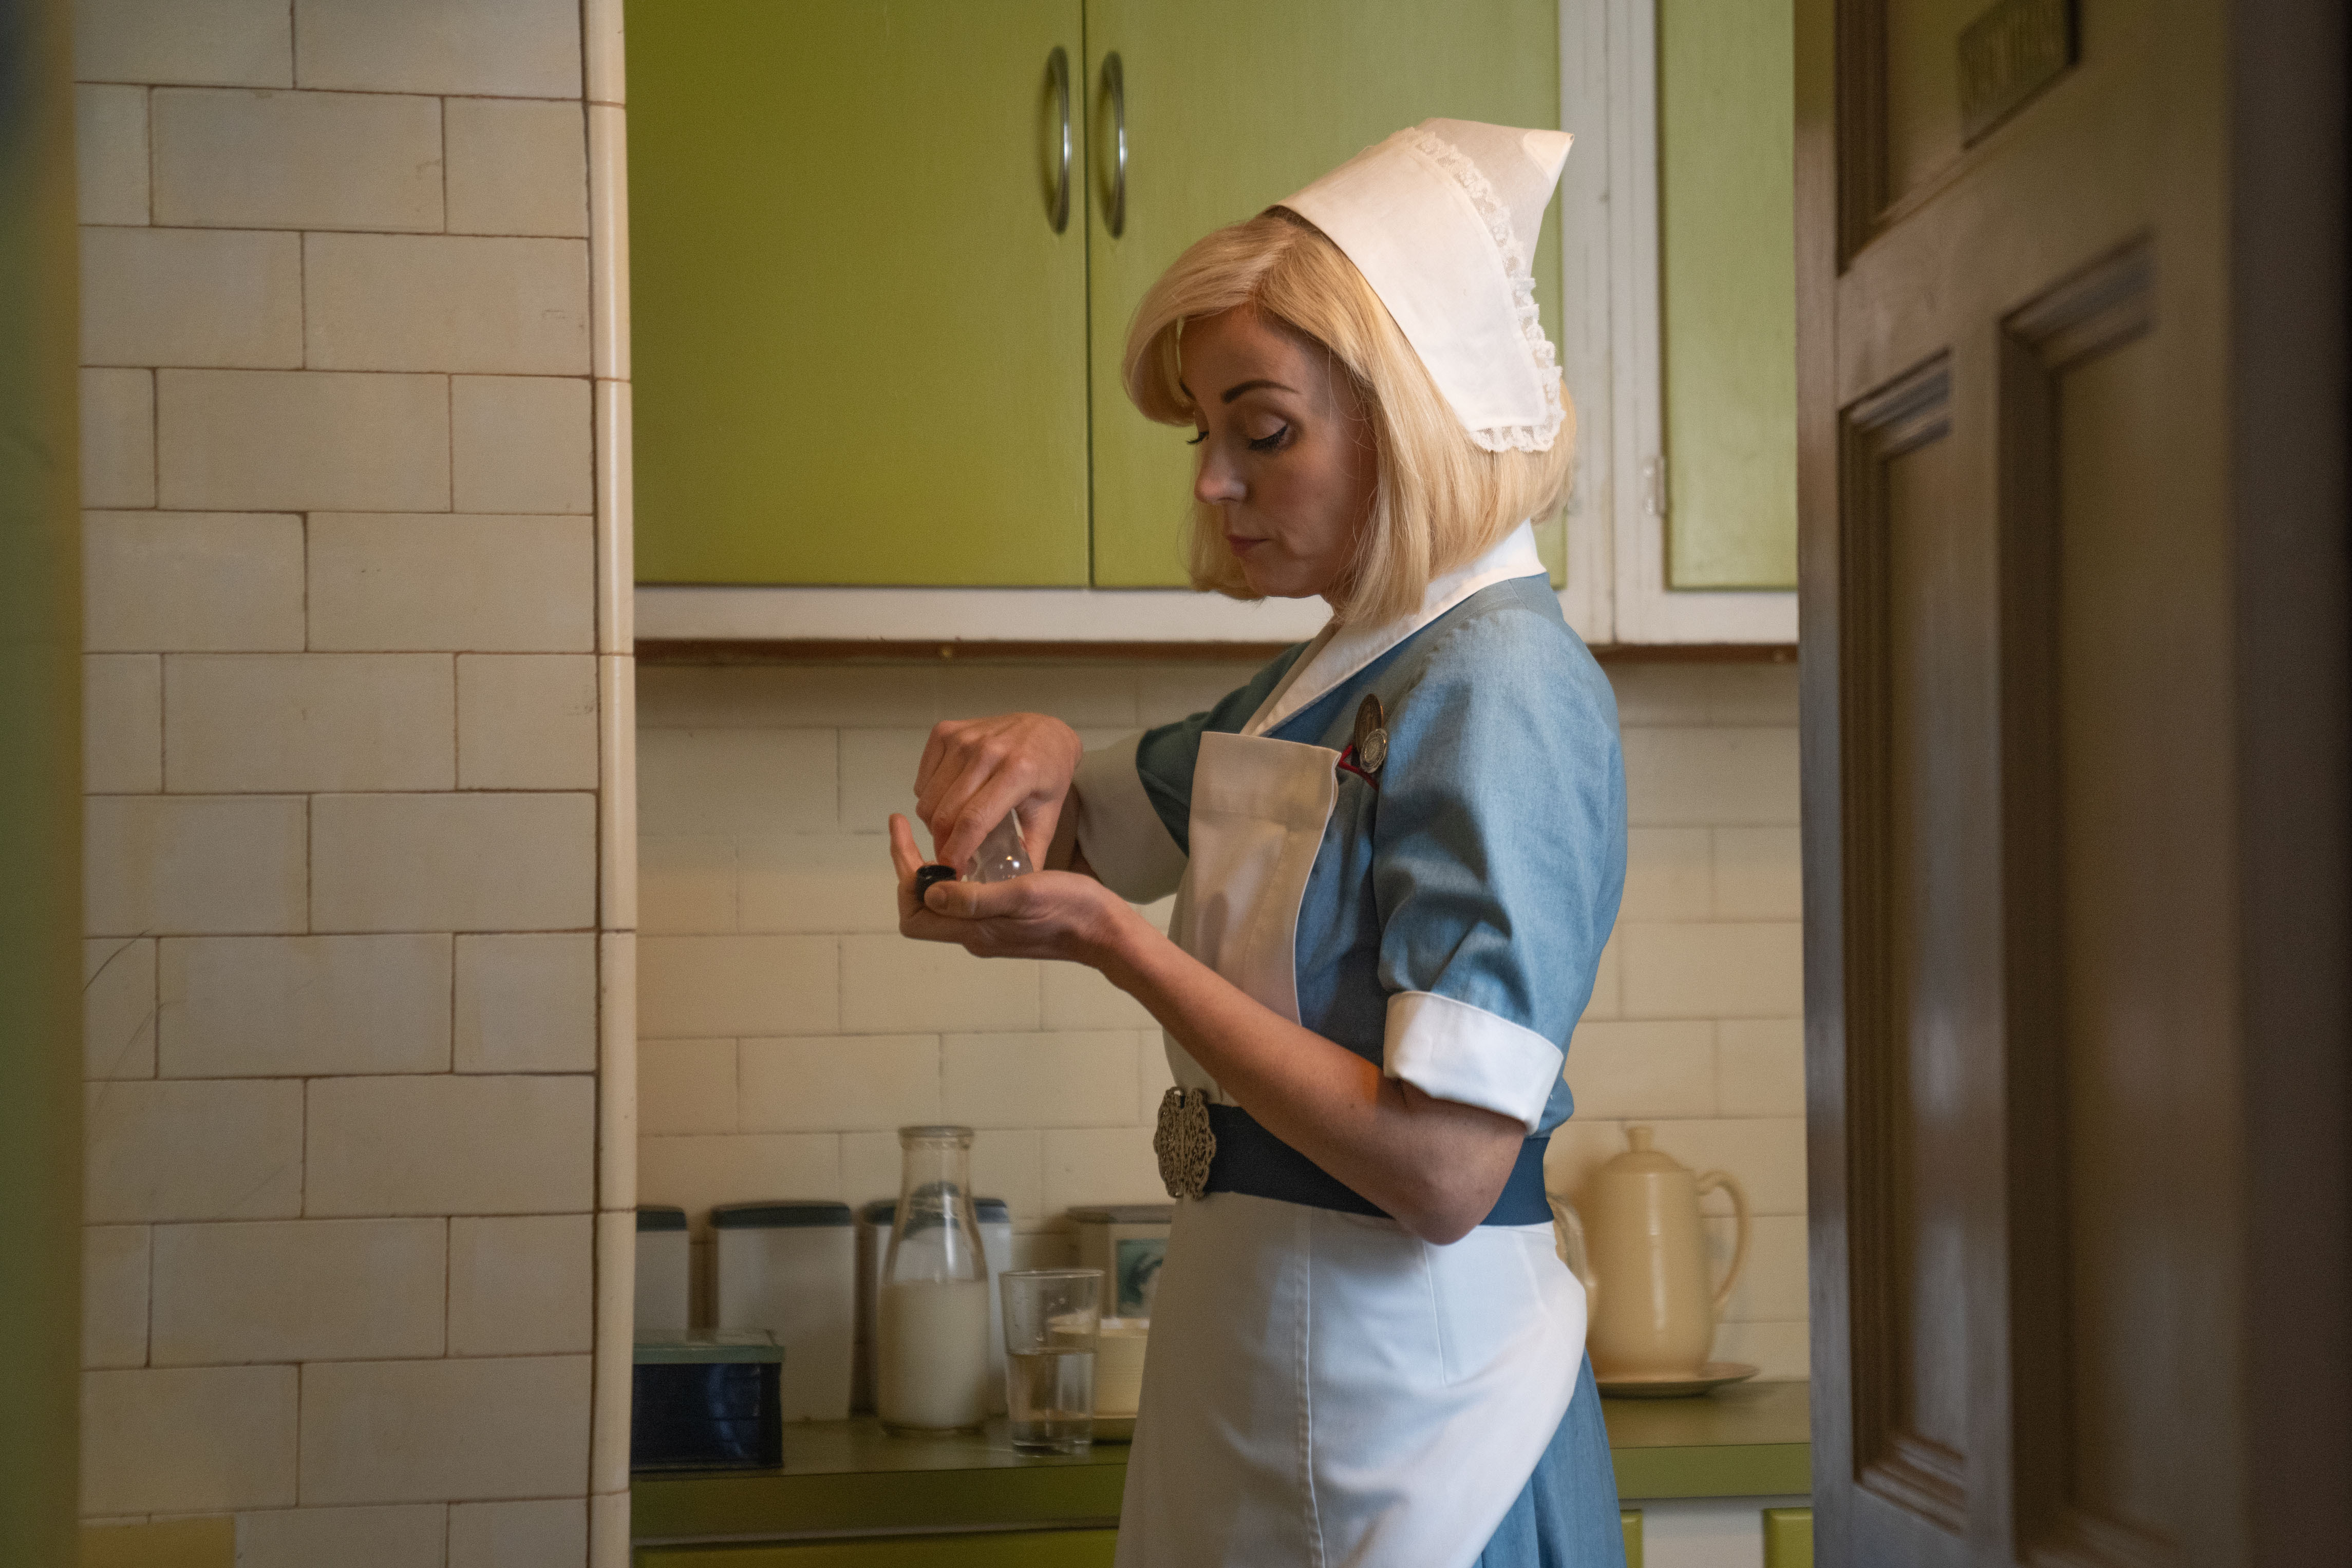 Trixie Aylward (HELEN GEORGE) in Call the Midwife season 13 episode 8